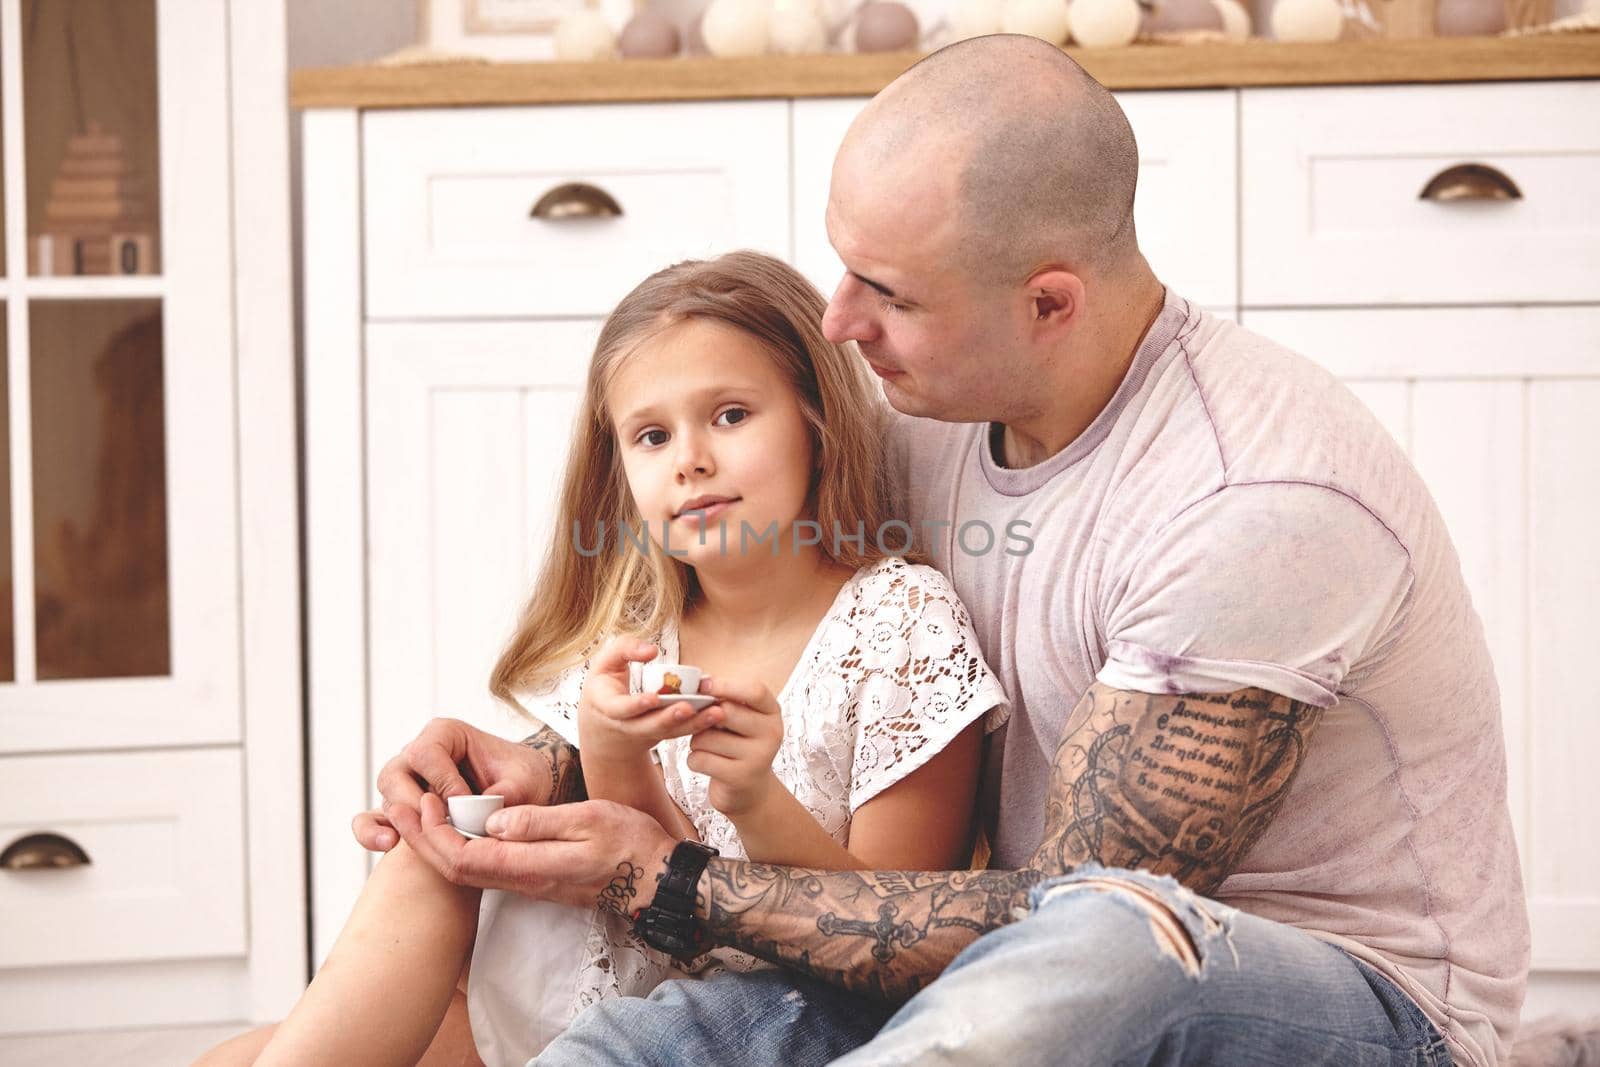 White modern kid's room whith a wooden furniture. Adorable daughter whith a long blond hair wearing a white dress is looking at the camera. They are drinking tea from a toy dishes in a modern kid's room whith a wooden furniture. Daddy with tattoos is hugging and looking at her. Friendly family spending their free time together sitting on a pillows.